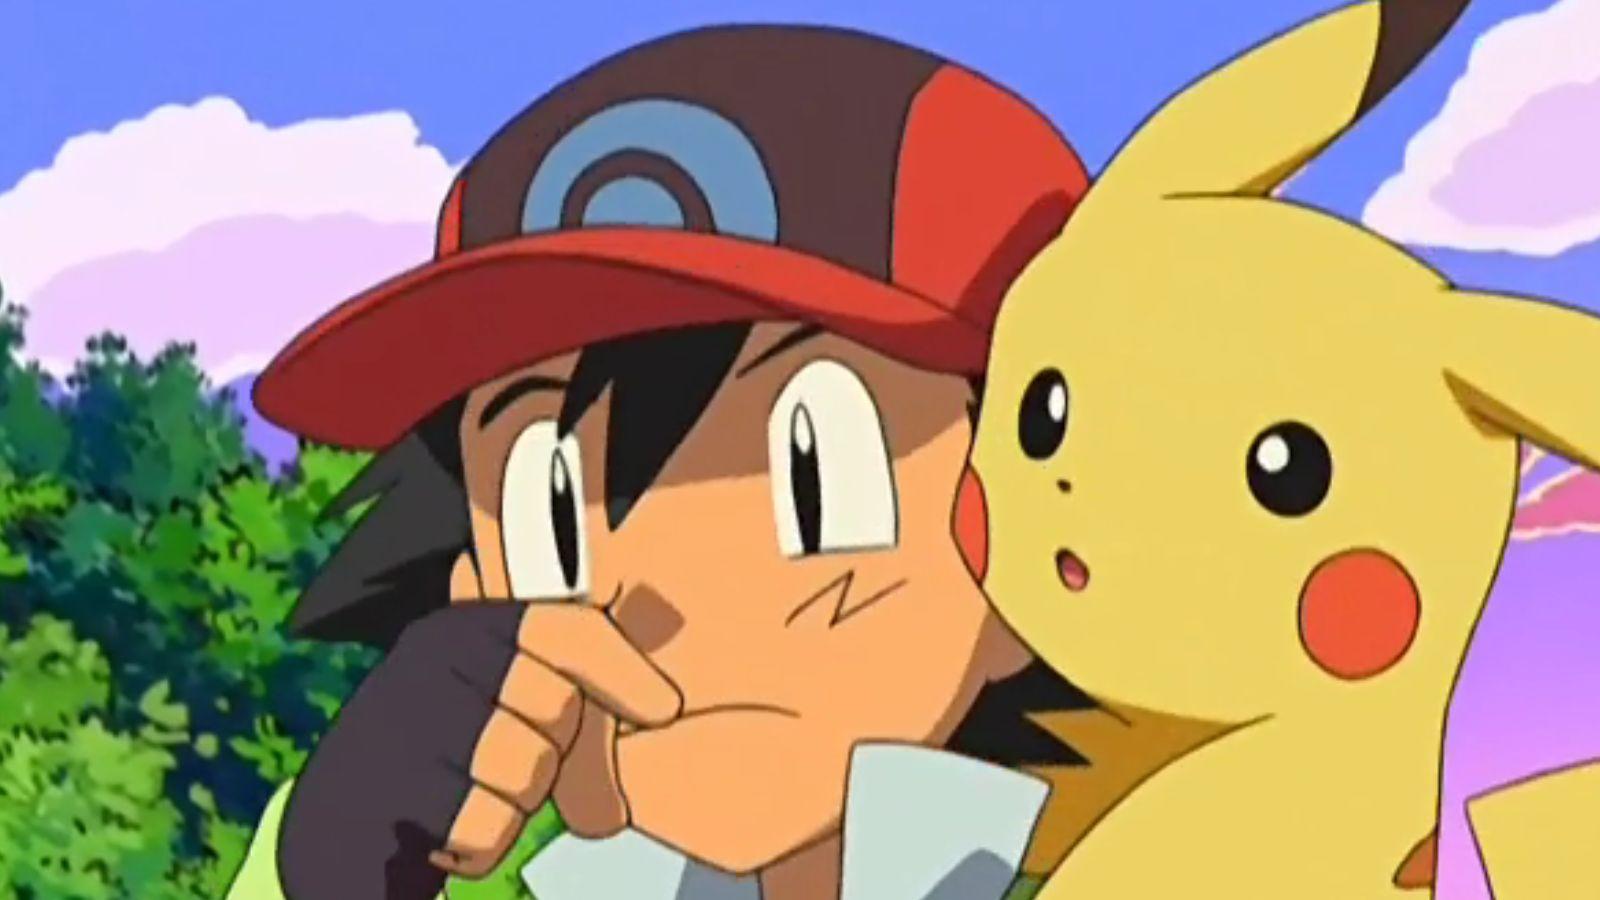 Pokemon trainer Ash Ketchum pinches his nose with Pikachu on his shoulder